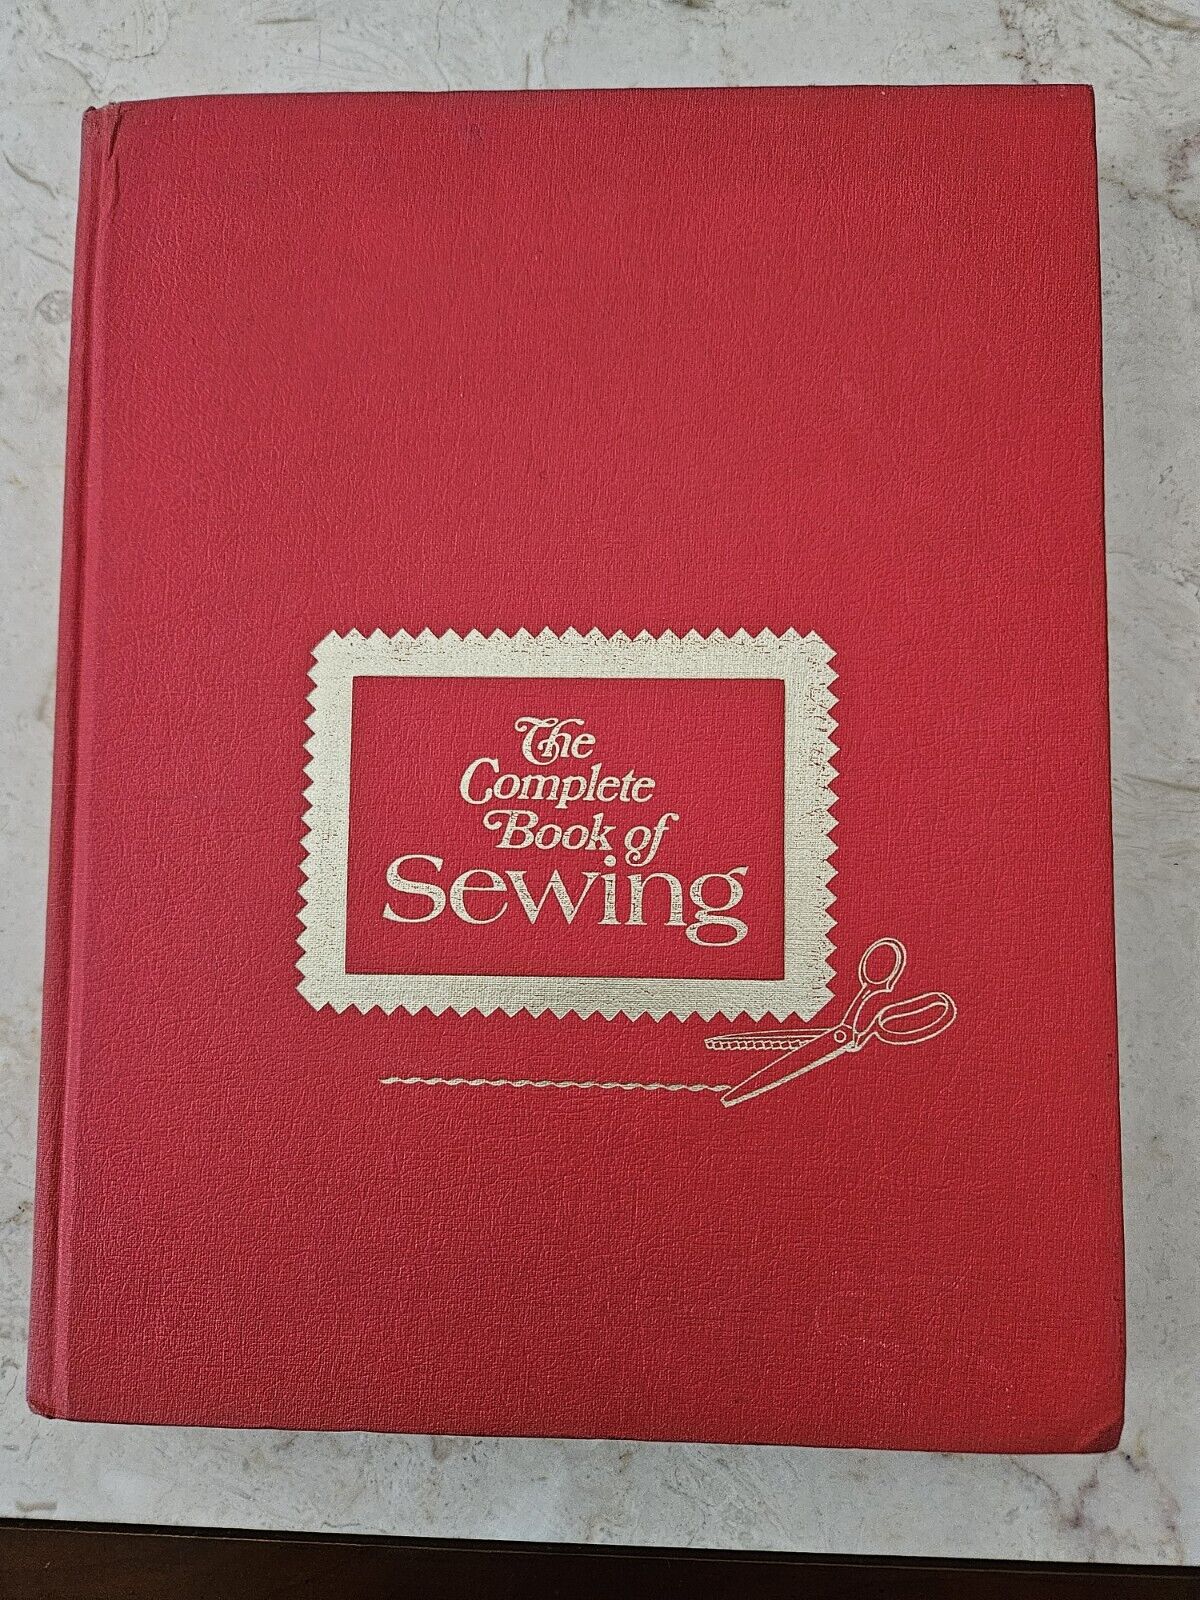 The Complete Book Of Sewing Vintage 1972 Patterns Directions Hard Back Pressing